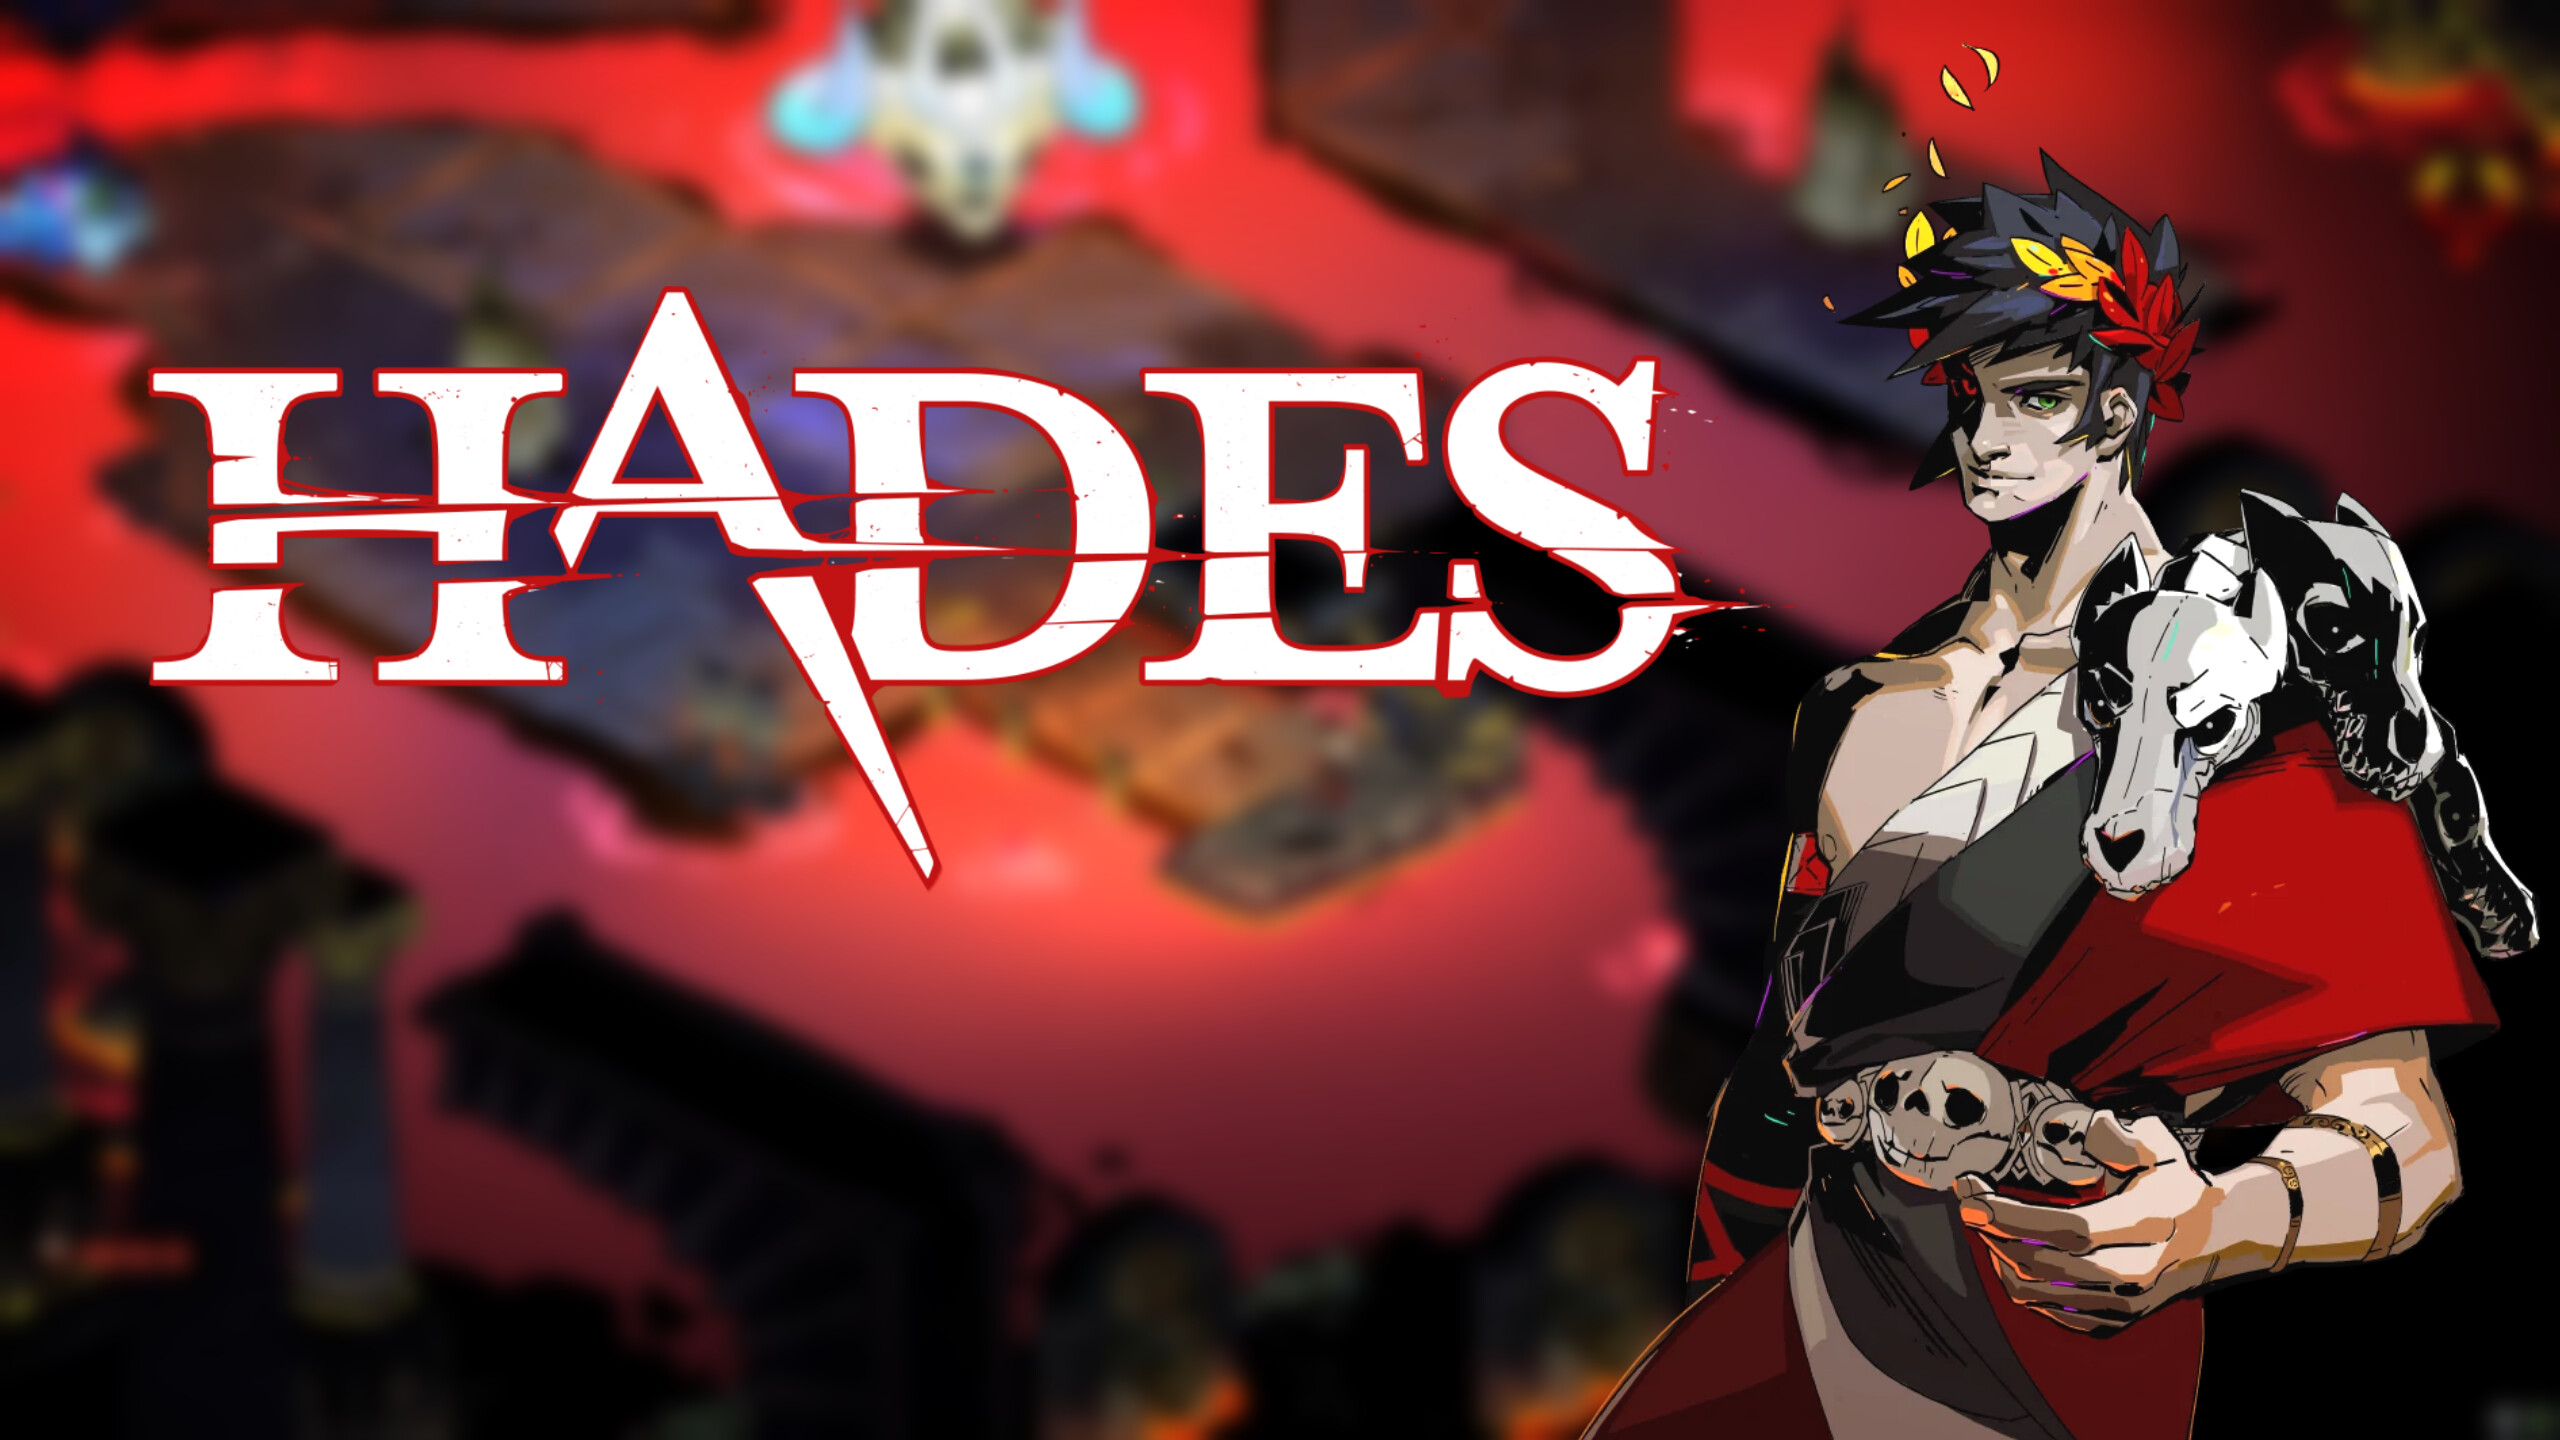 Hades: Developed following Supergiant's Pyre, a game in which they wanted to explore procedural narrative storytelling, but due to the nature of the main gameplay, found that players did not play through Pyre multiple times to explore this. 2560x1440 HD Wallpaper.